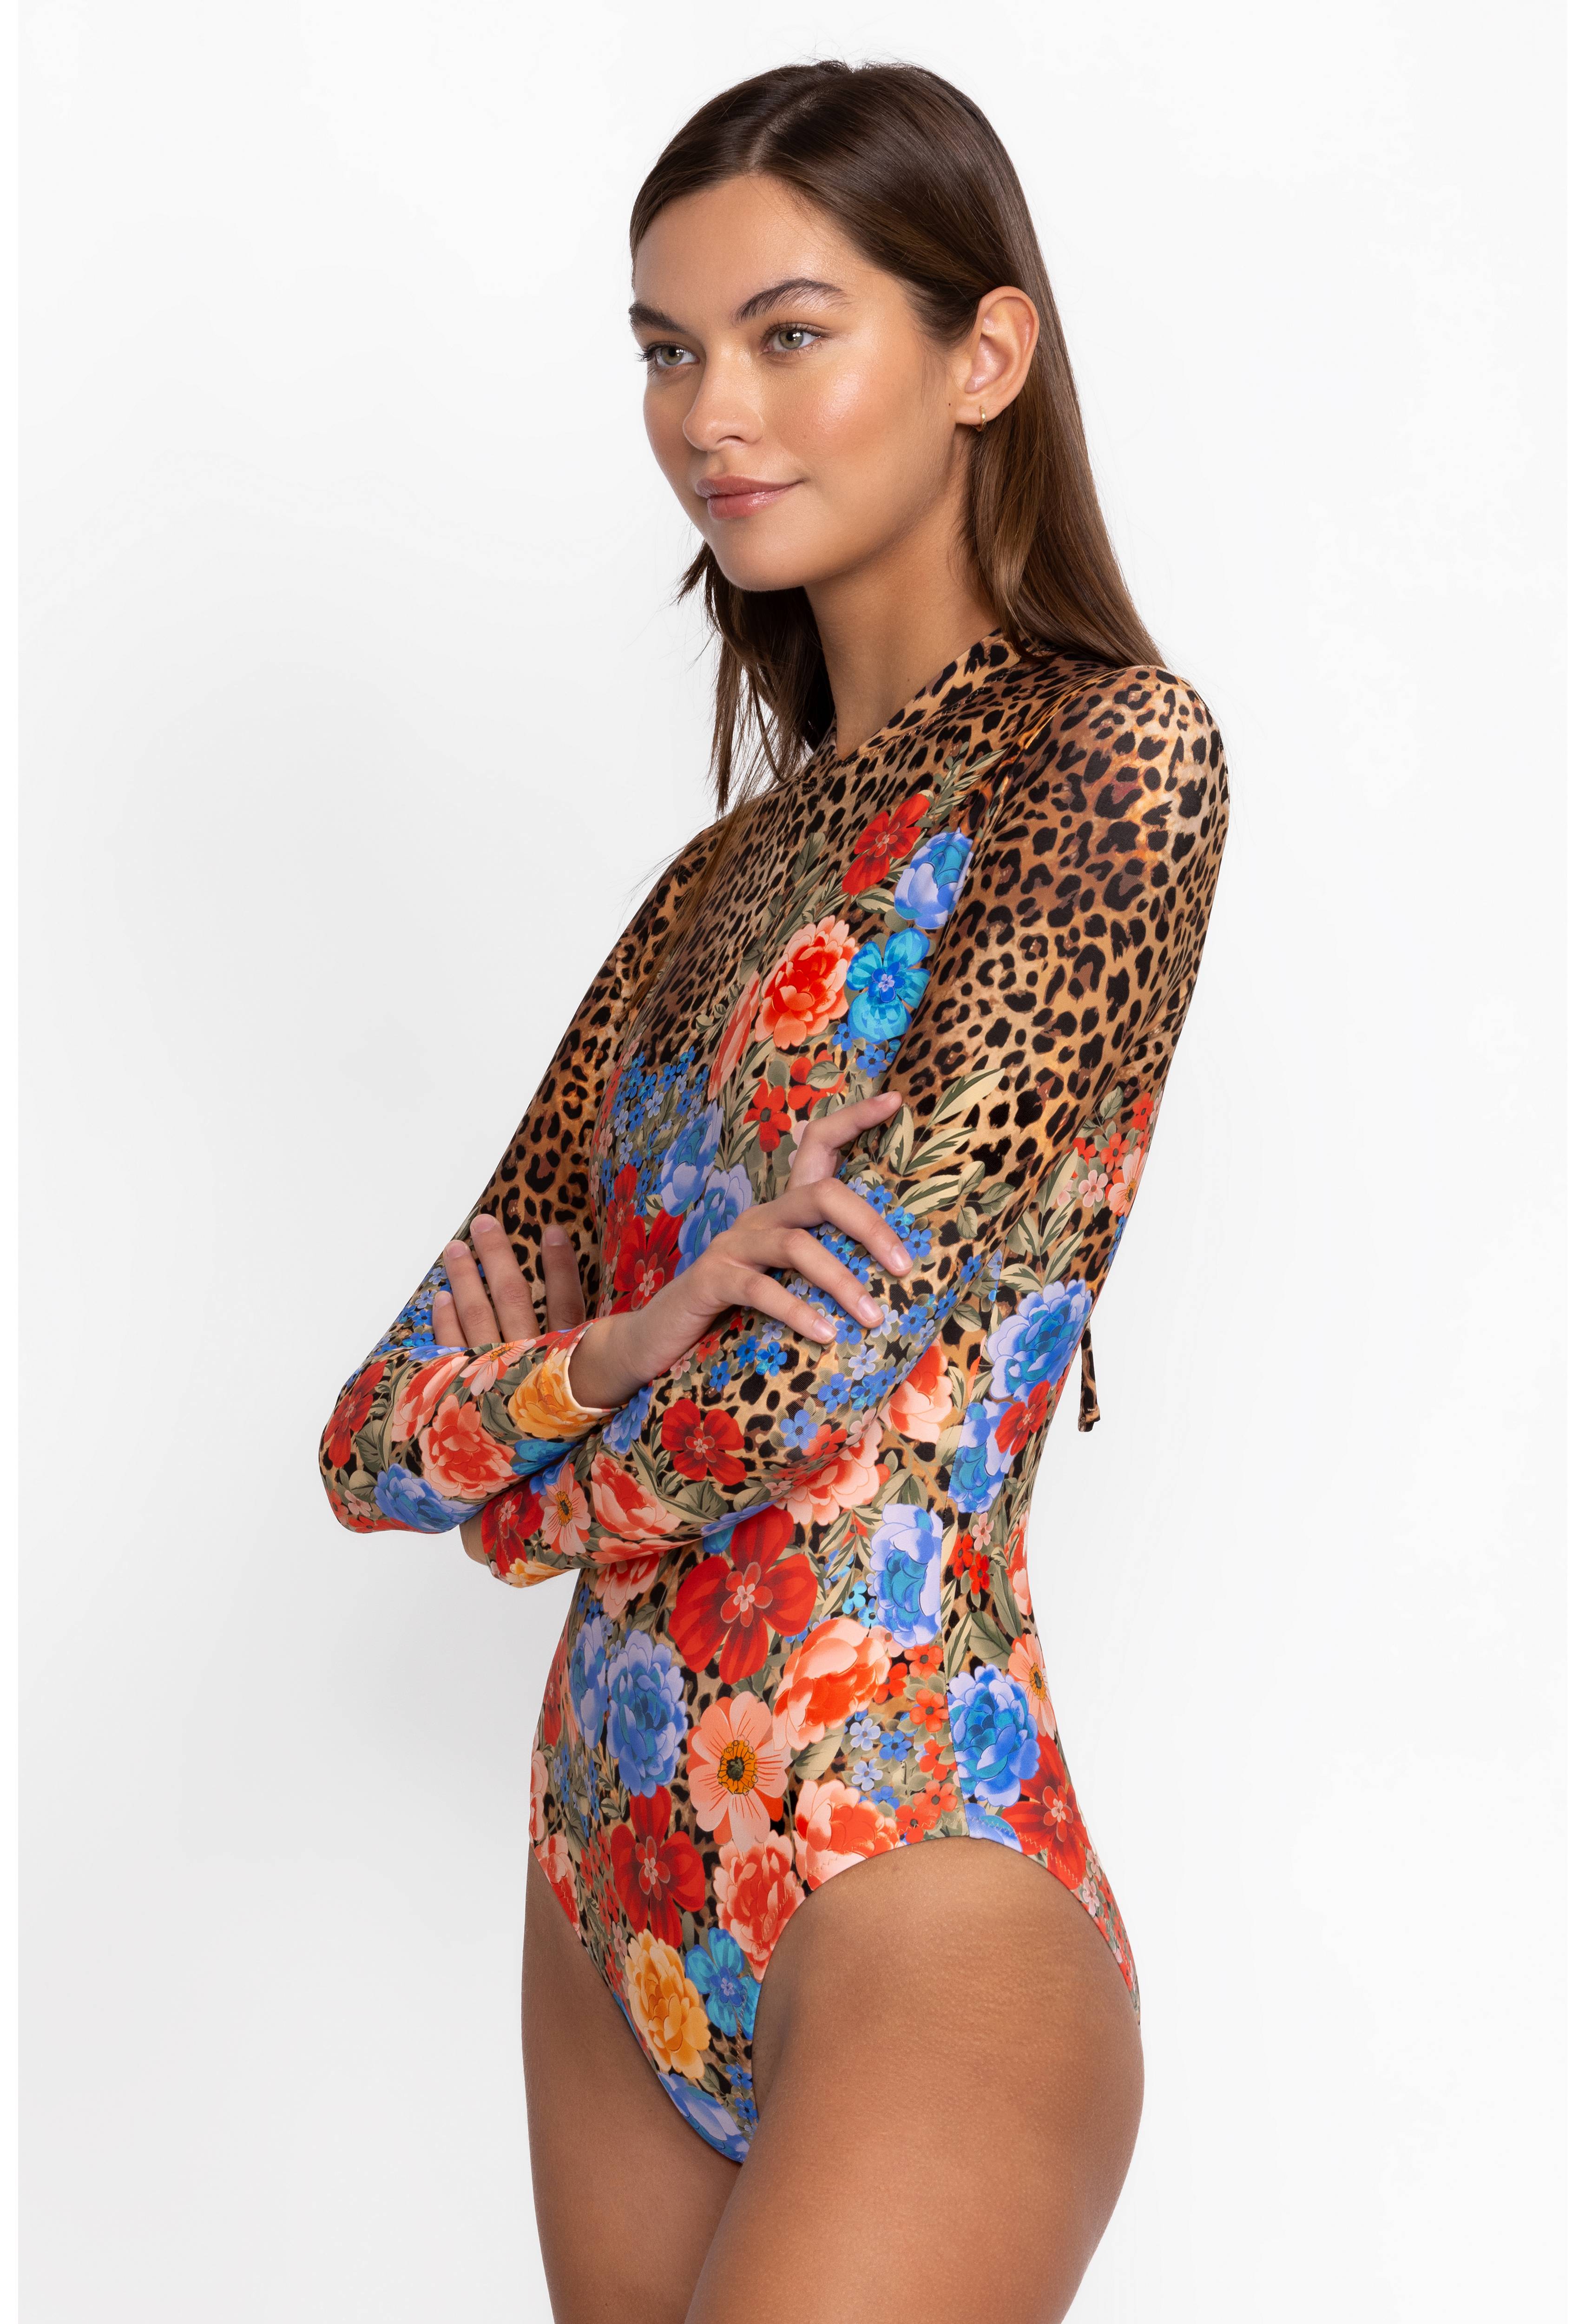 CHEETAH CROSS OVER NECK SURF ONE PIECE, , large image number 2